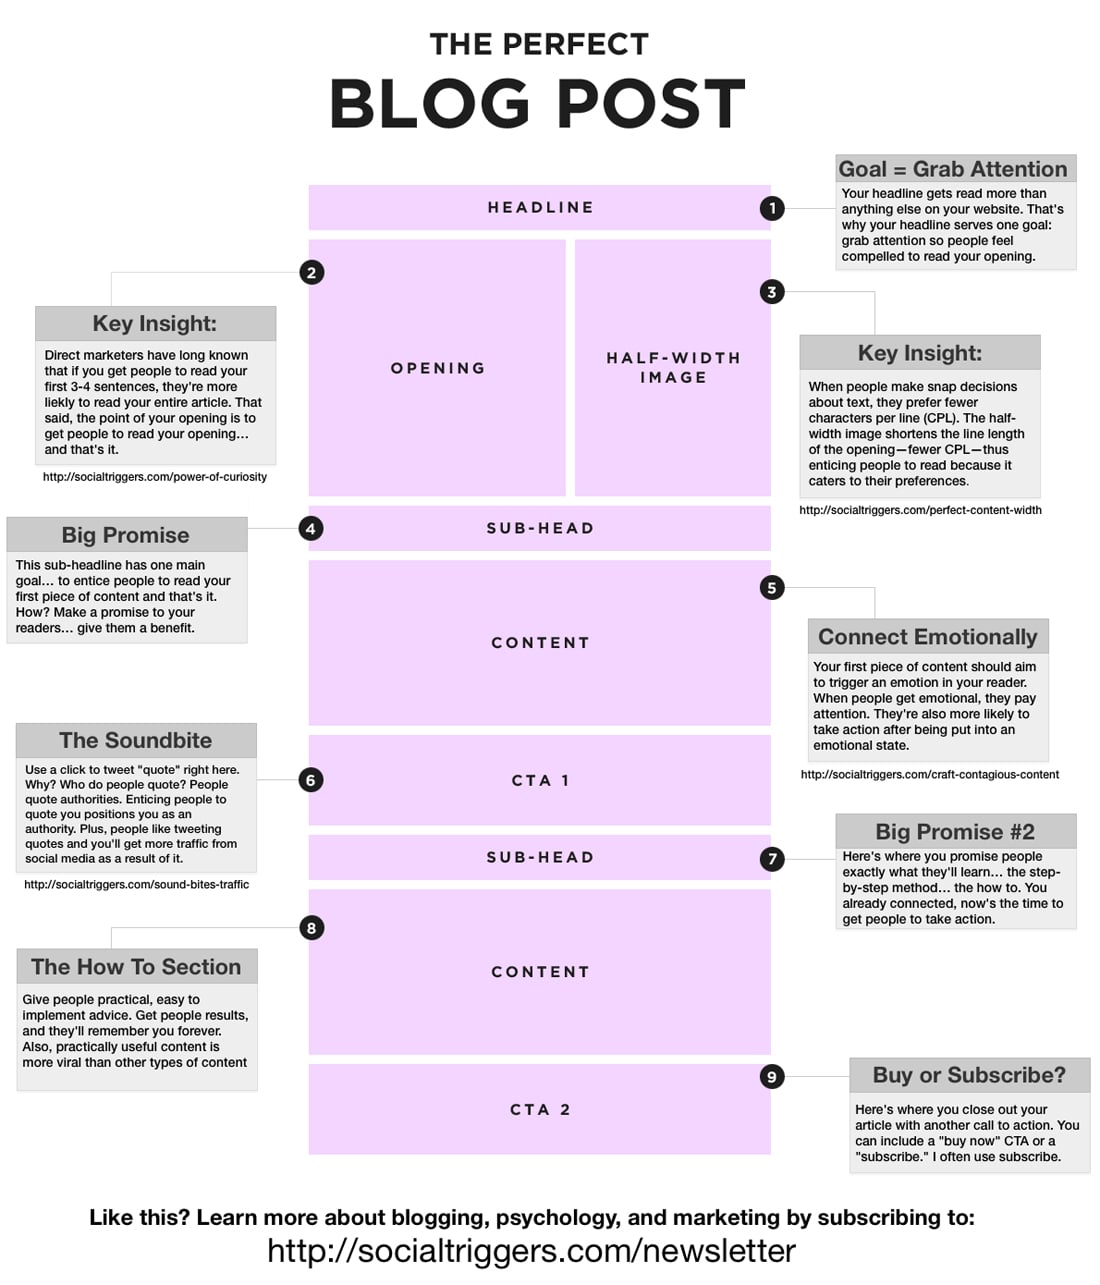 9 Essential Elements Of The Perfect Blog Post [Infographic]